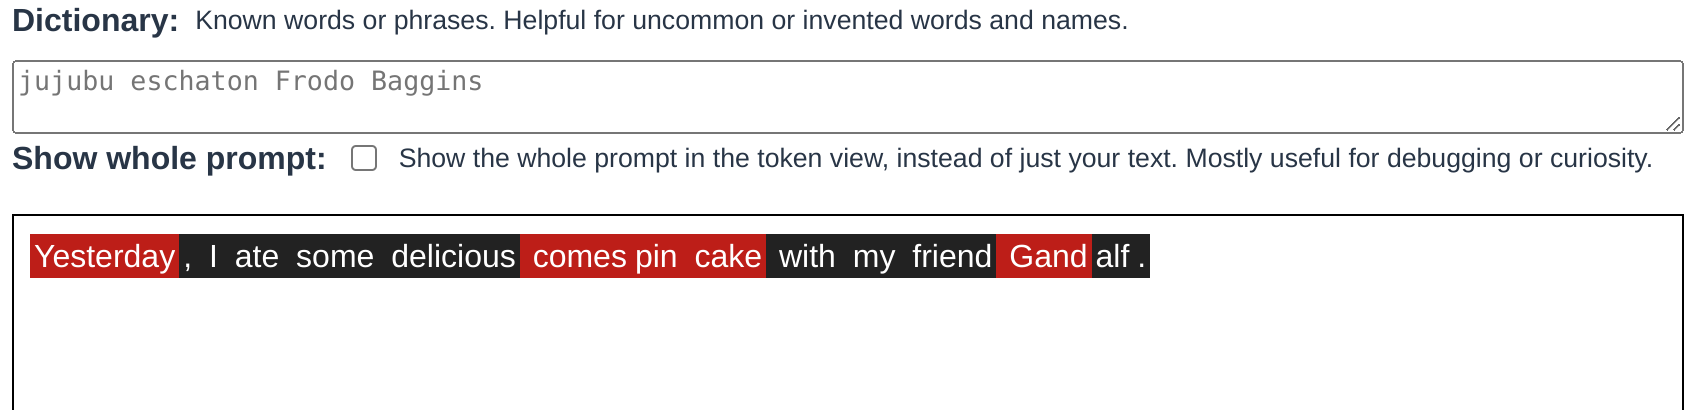 "Yesterday, I ate some delicious comespin cake with my friend Gandalf" has "comespin" and "Gandalf" flagged (along with some false positives)